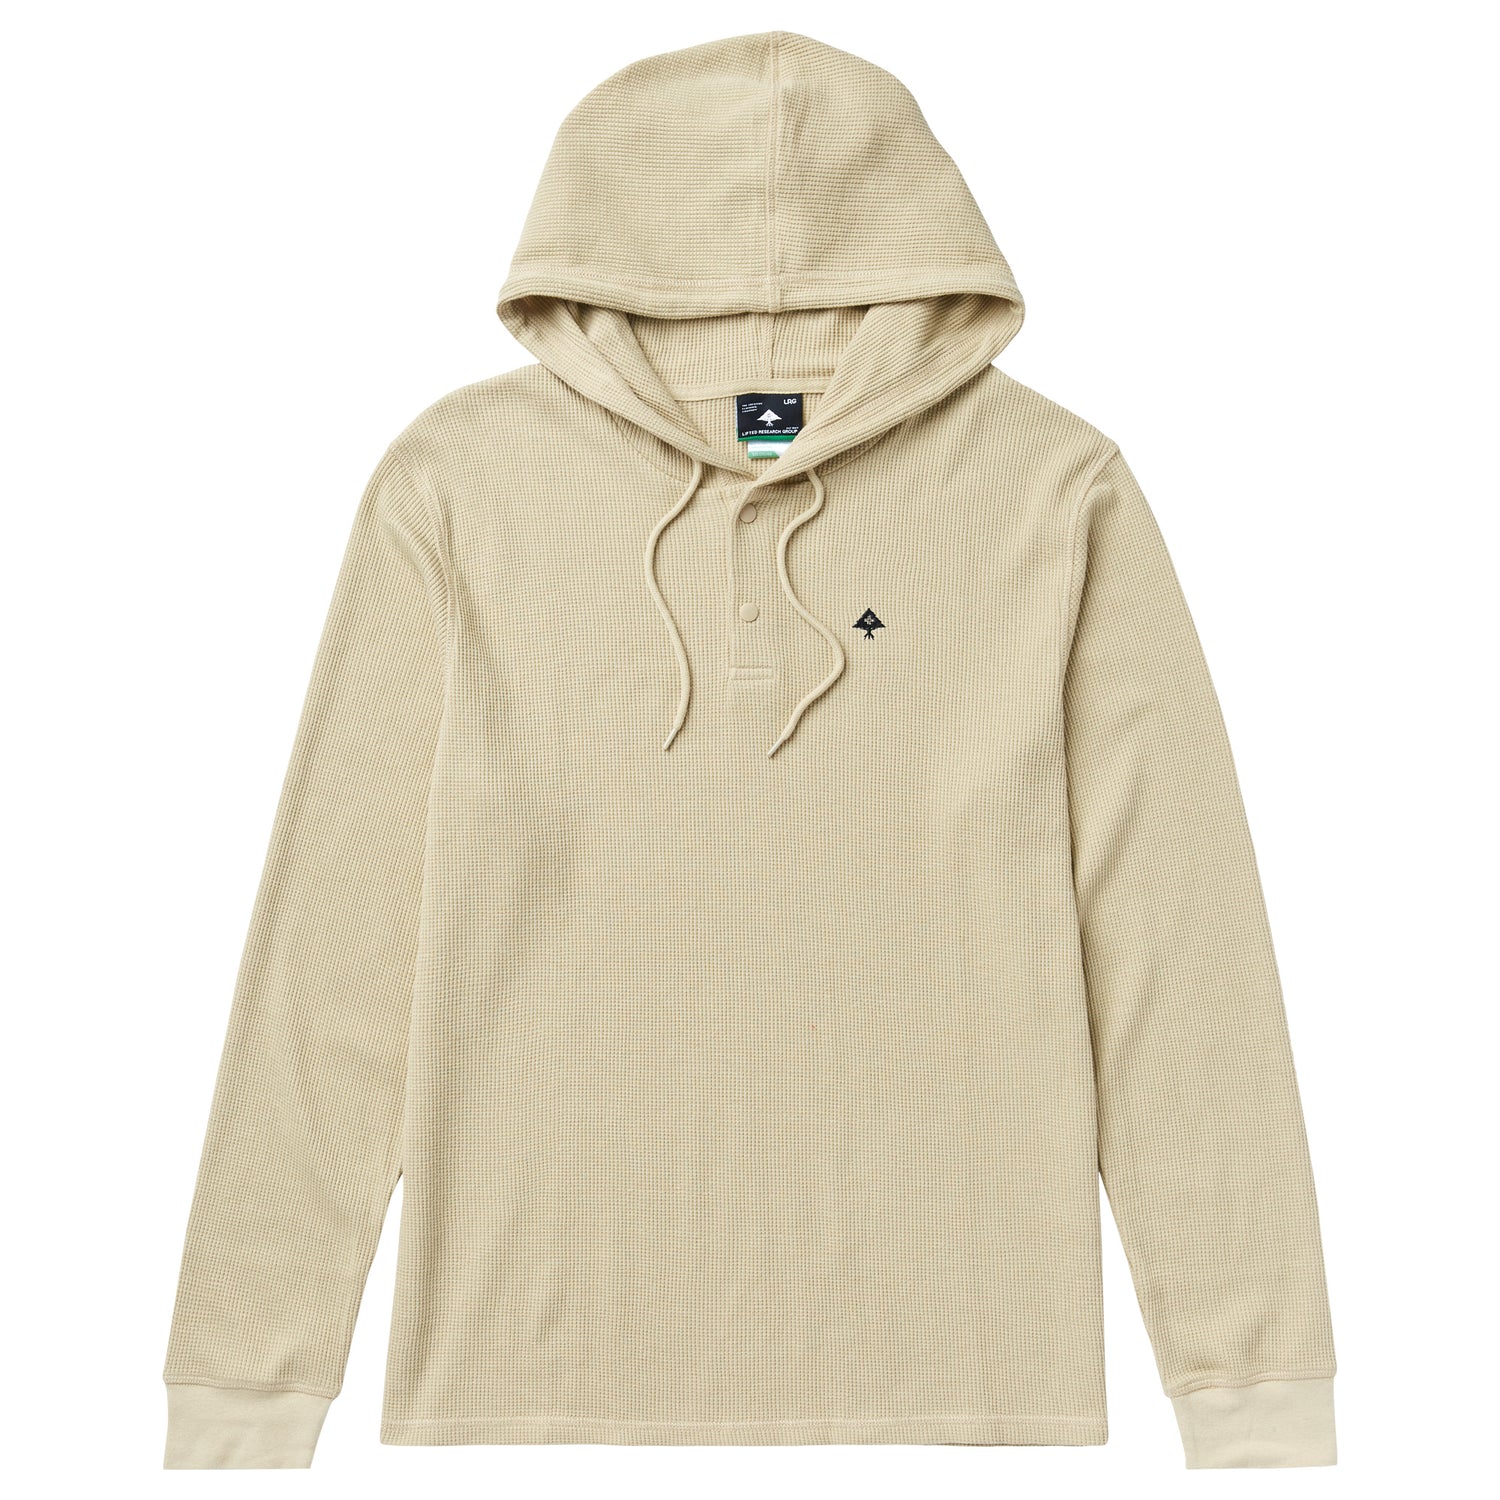 LRG SYCAMORE THERMAL HOODED HENLEY TAN